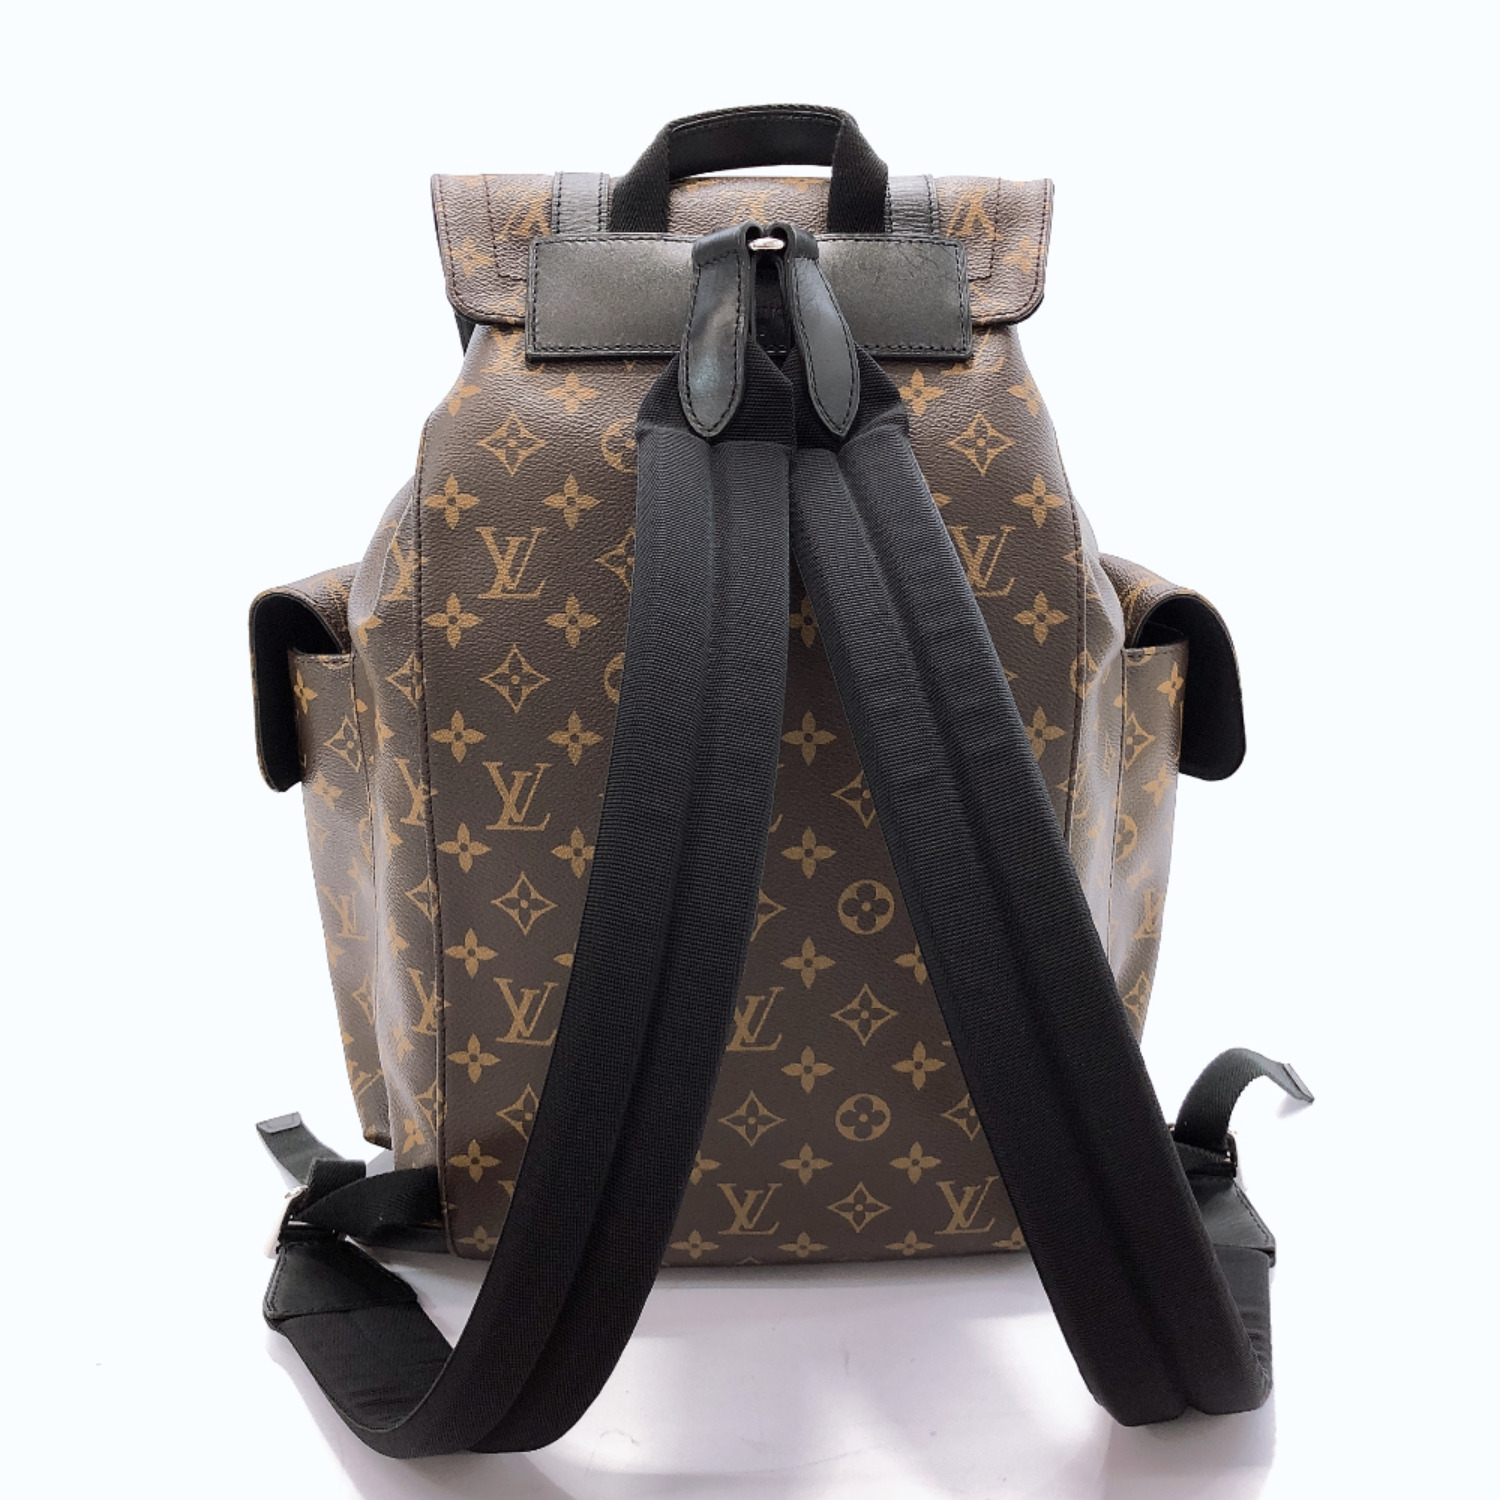 LOUIS VUITTON Backpack Â· Daypack M43735 Christopher PM Monogram macacer mens | eBay